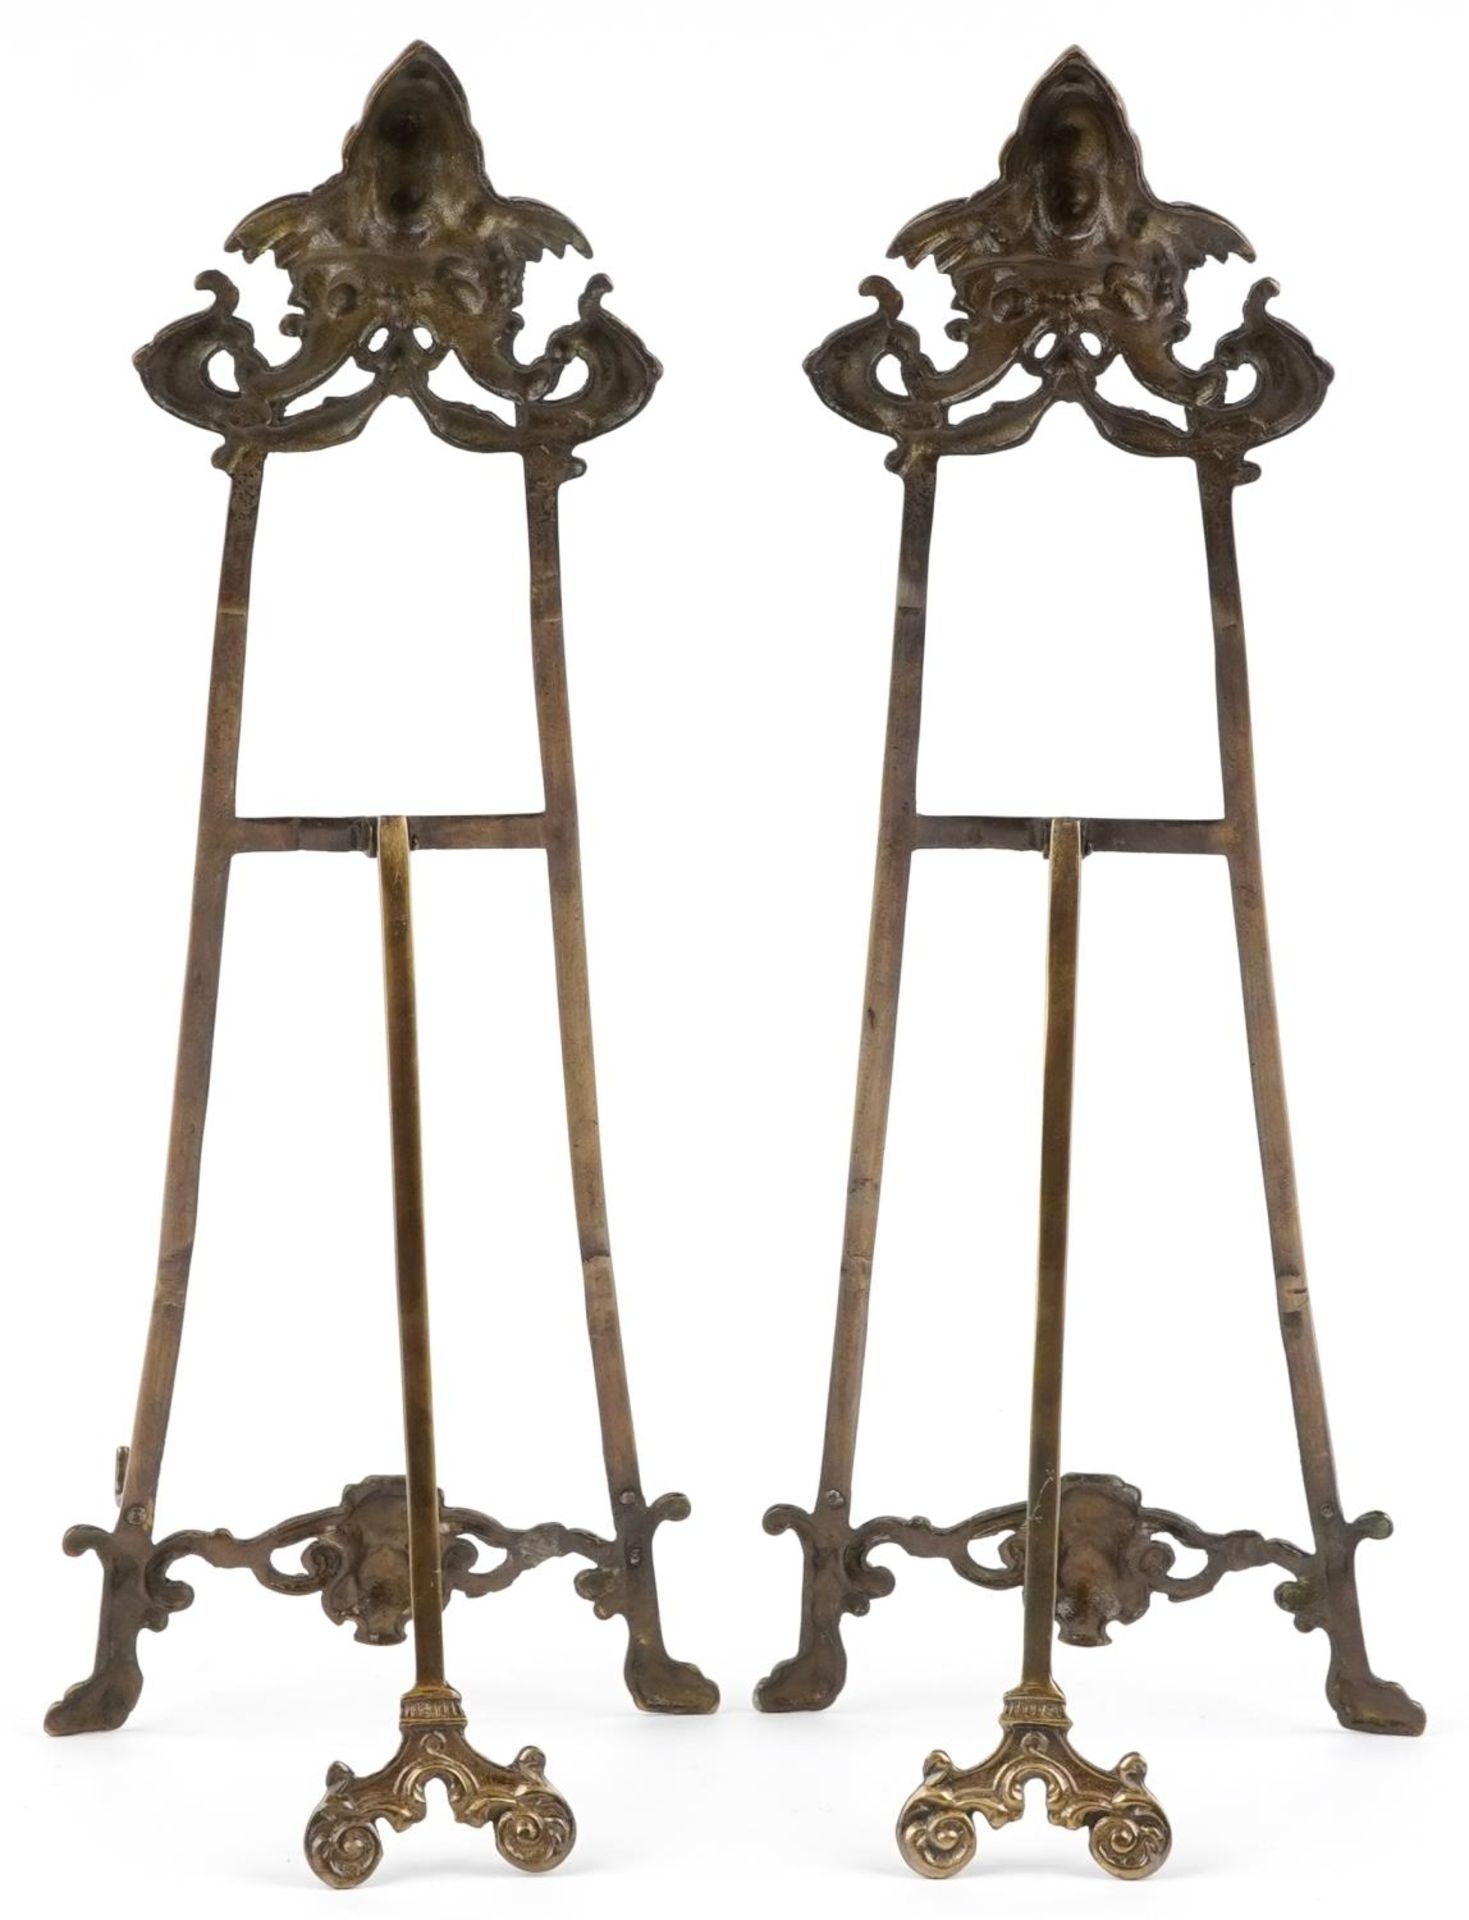 Pair of Rococo style brass easel stands, each 56cm high - Image 3 of 3